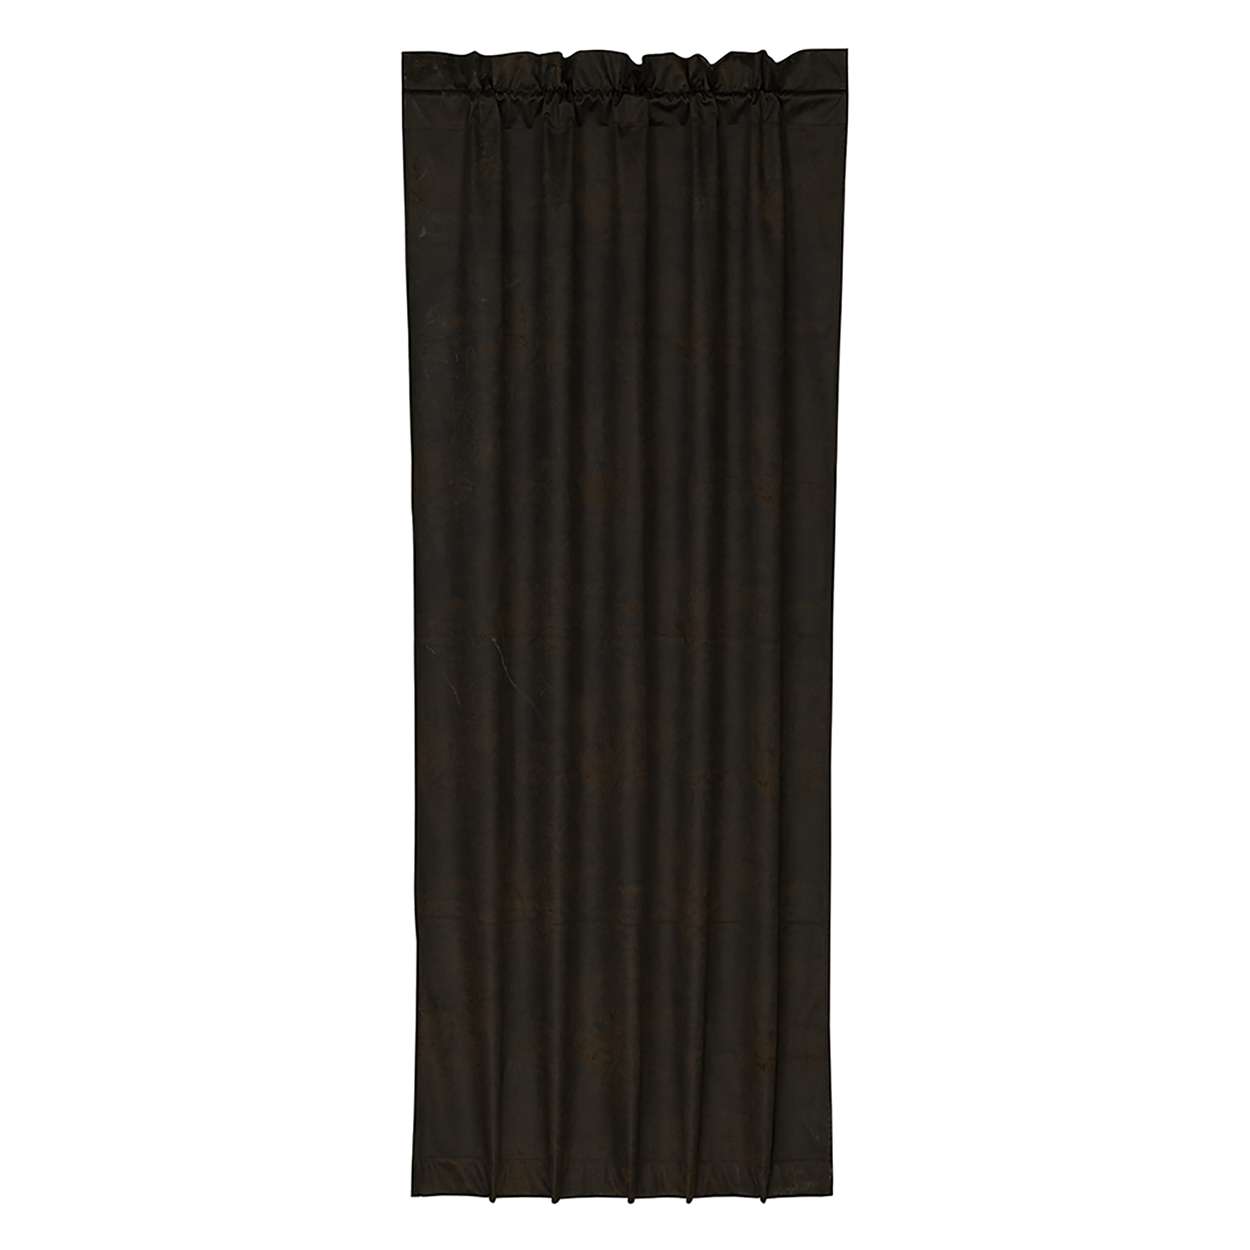 CU1001 48X84 Faux Leather Curtain with Tieback Chocolate